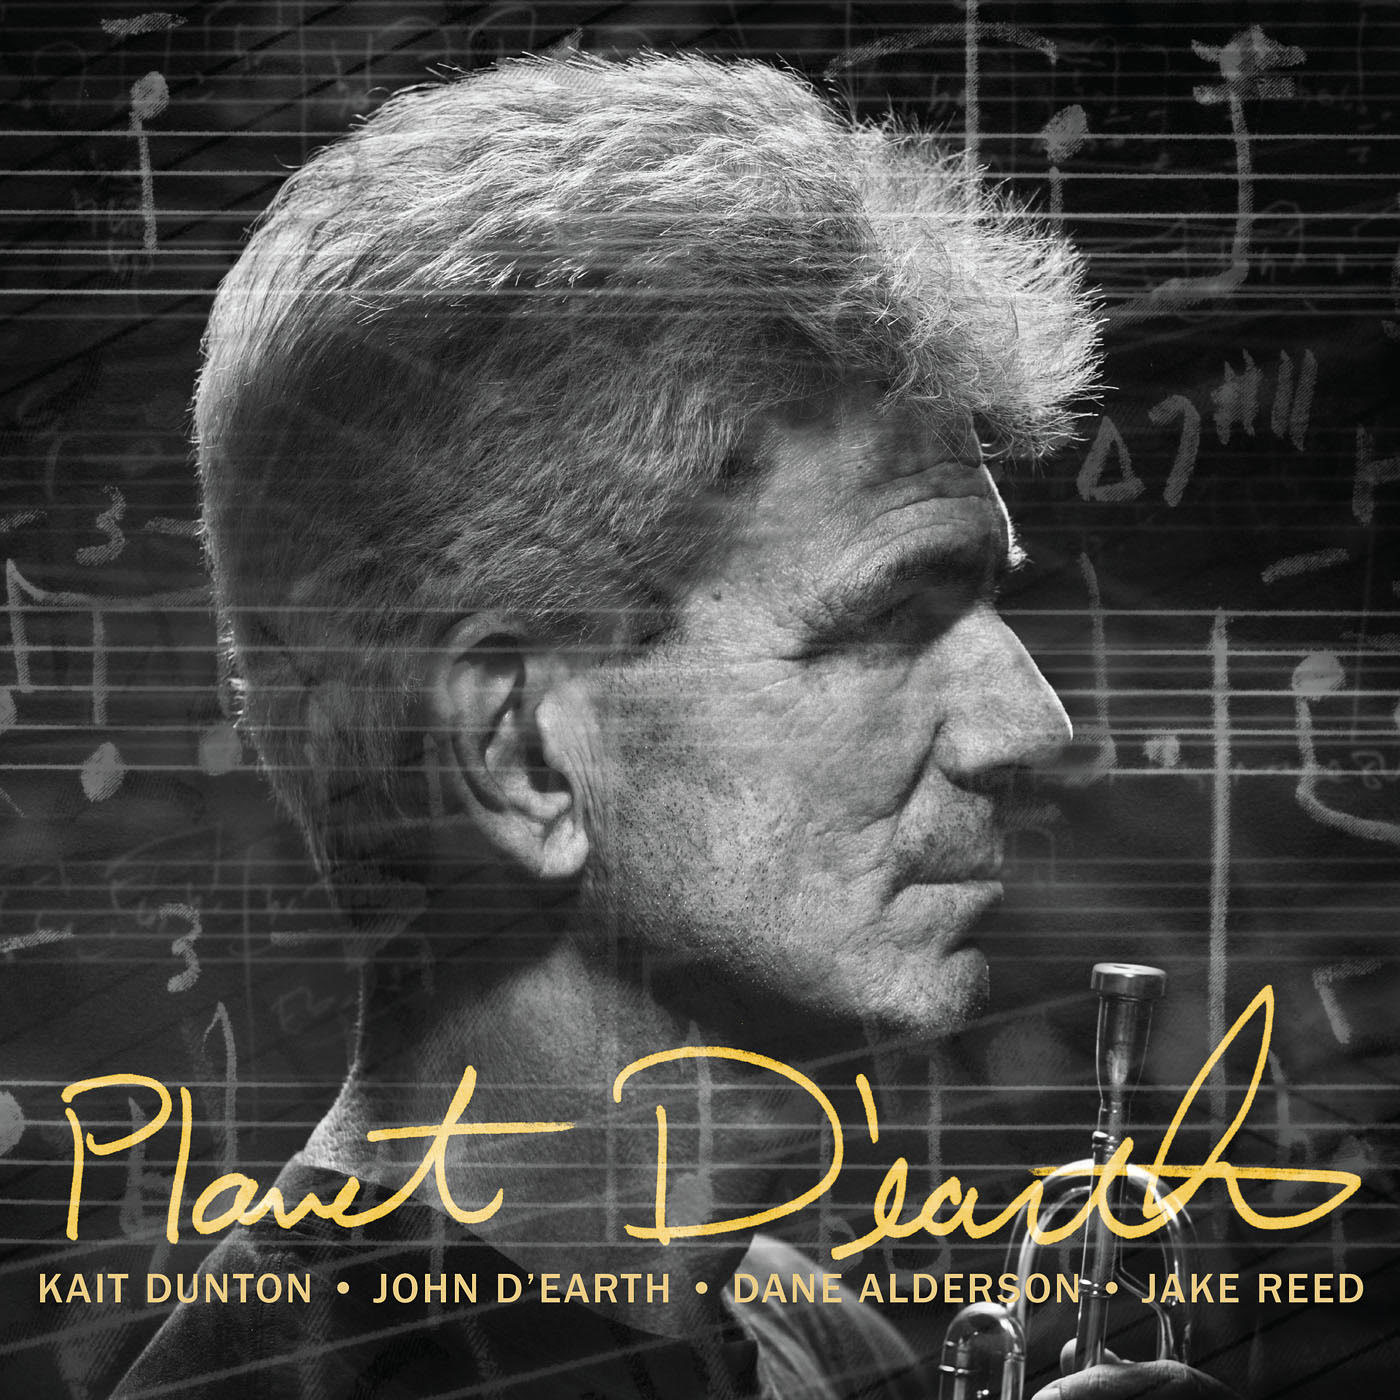 The album cover, featuring John D’earth.